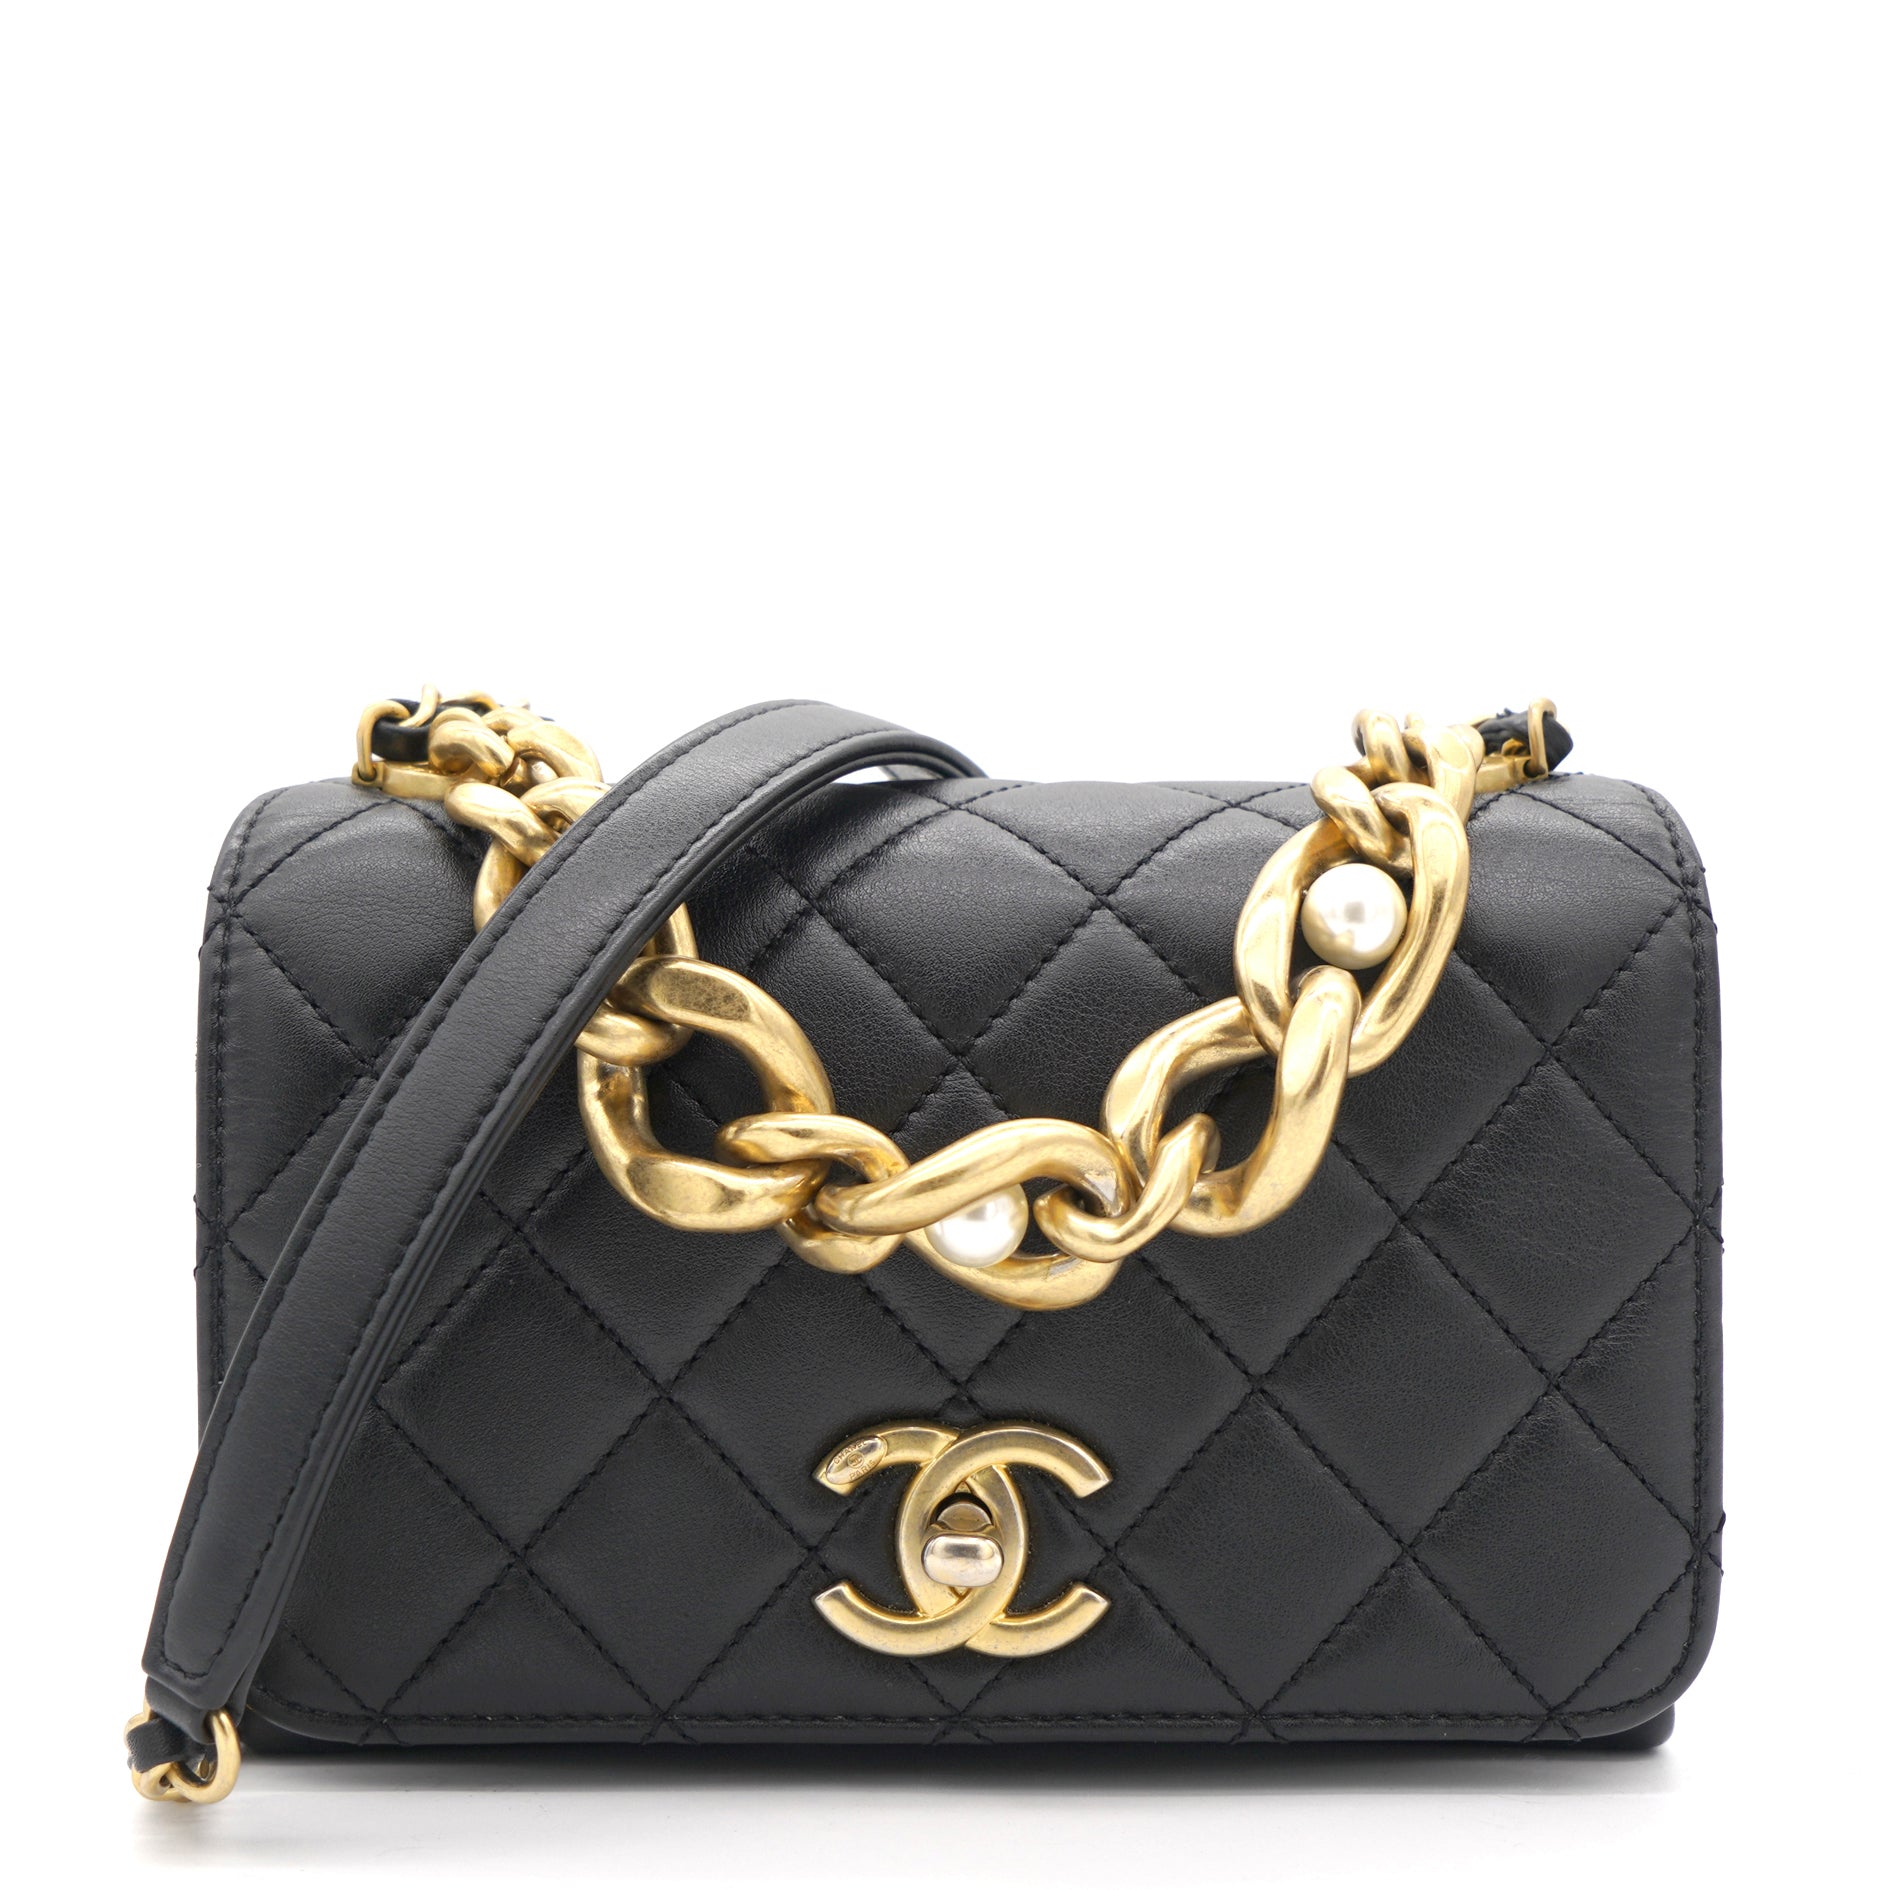 CHANEL Sphere Bag  Occasion Certified Authentic